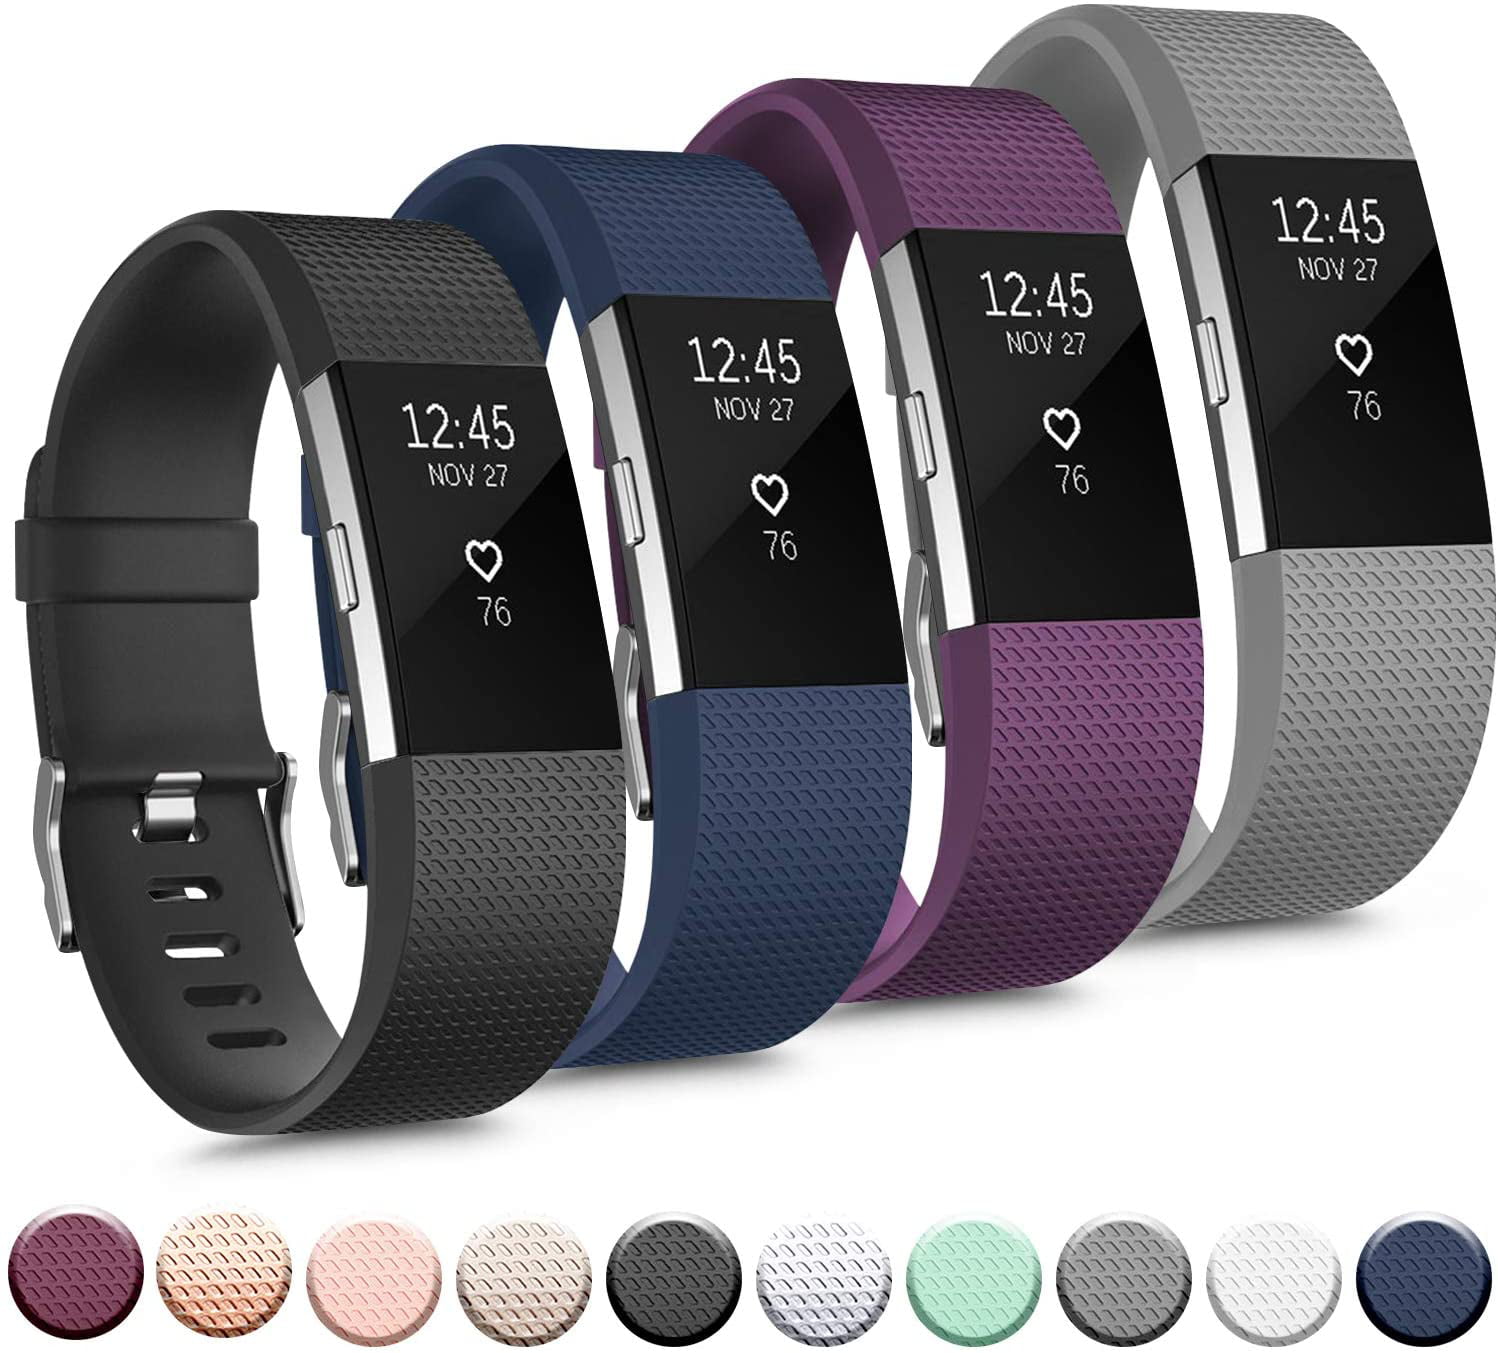 Sports Protective Band For Fitbit Charge 2 Bands 